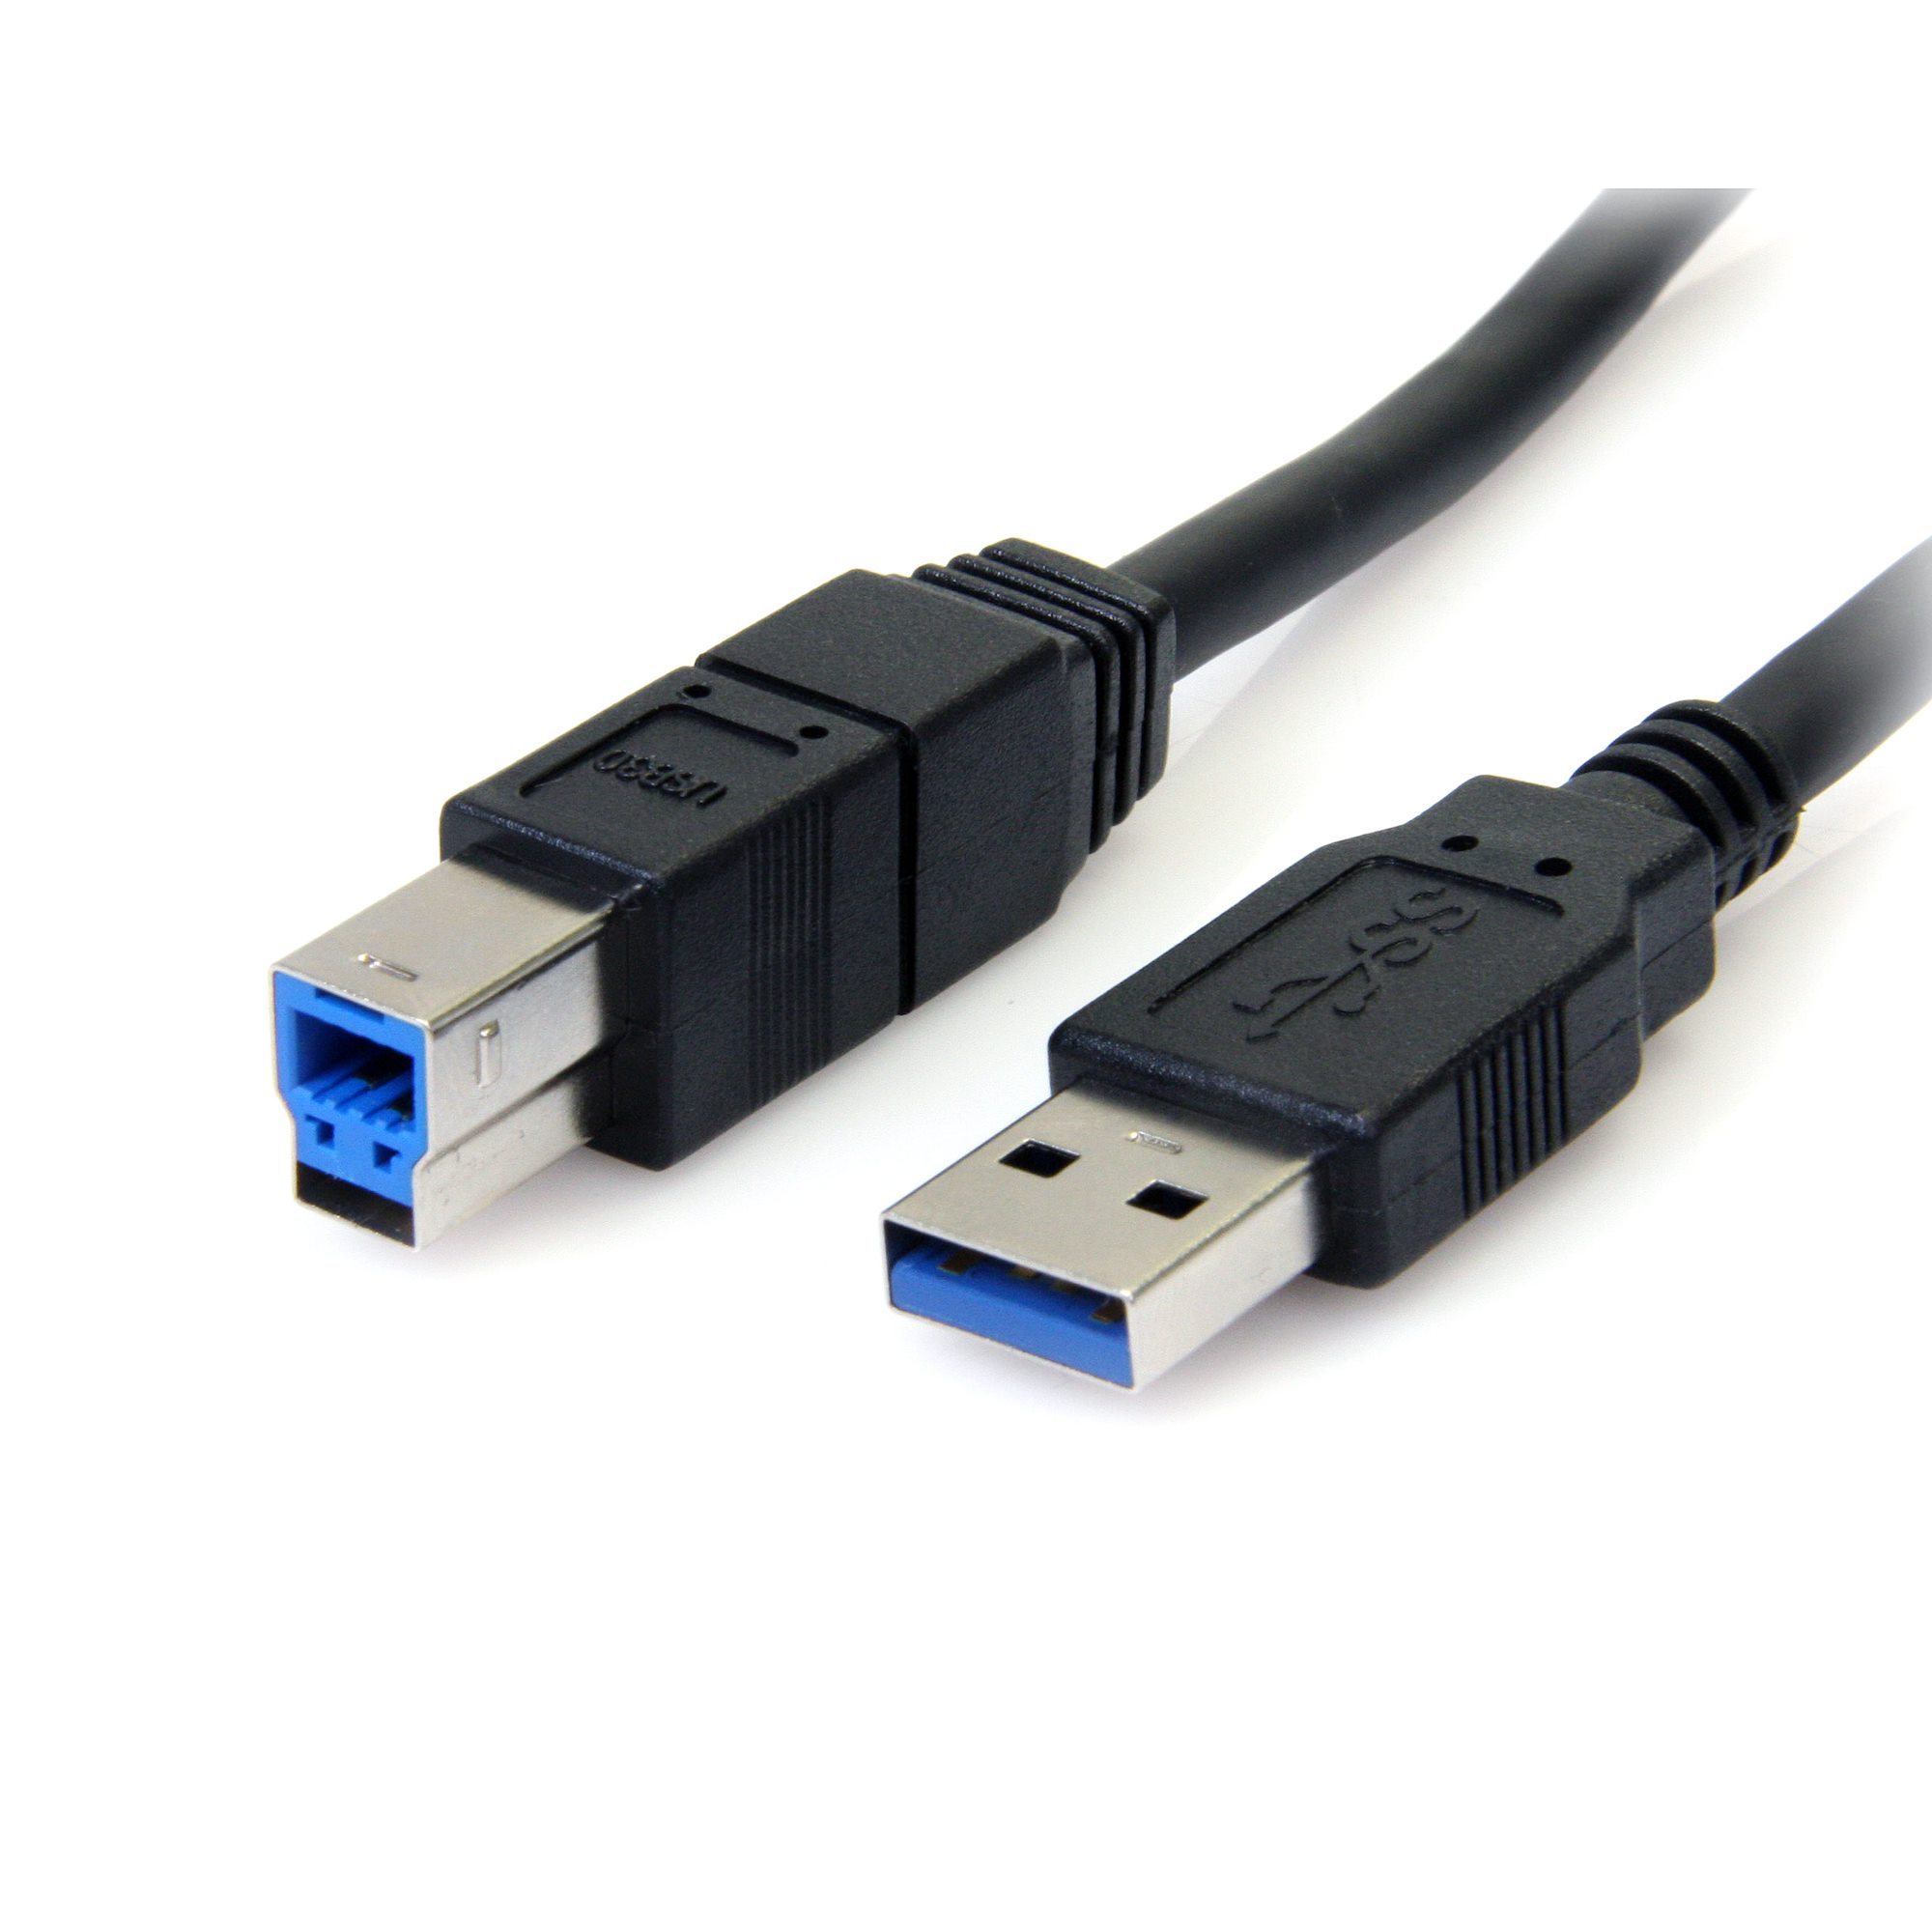 Tanke afstemning lyse 10 ft Black SuperSpeed USB 3.0 Cable A/B - USB 3.0 Cables | StarTech.com